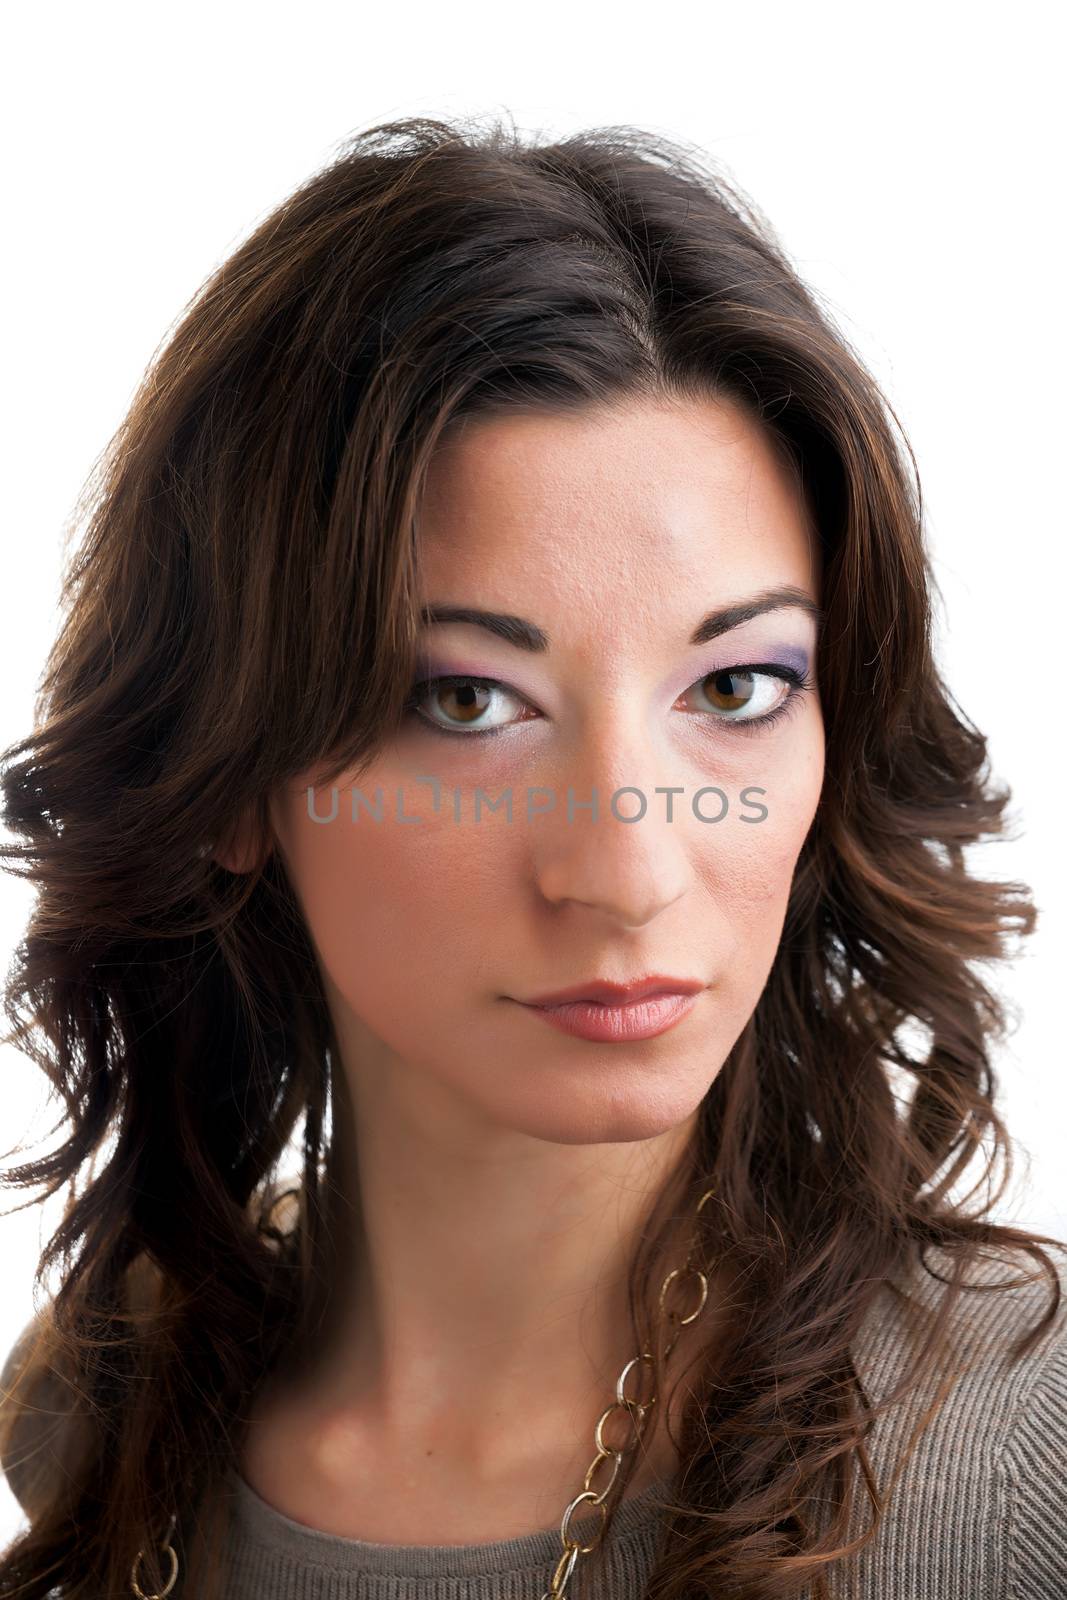 Italian Brunette Woman by graficallyminded